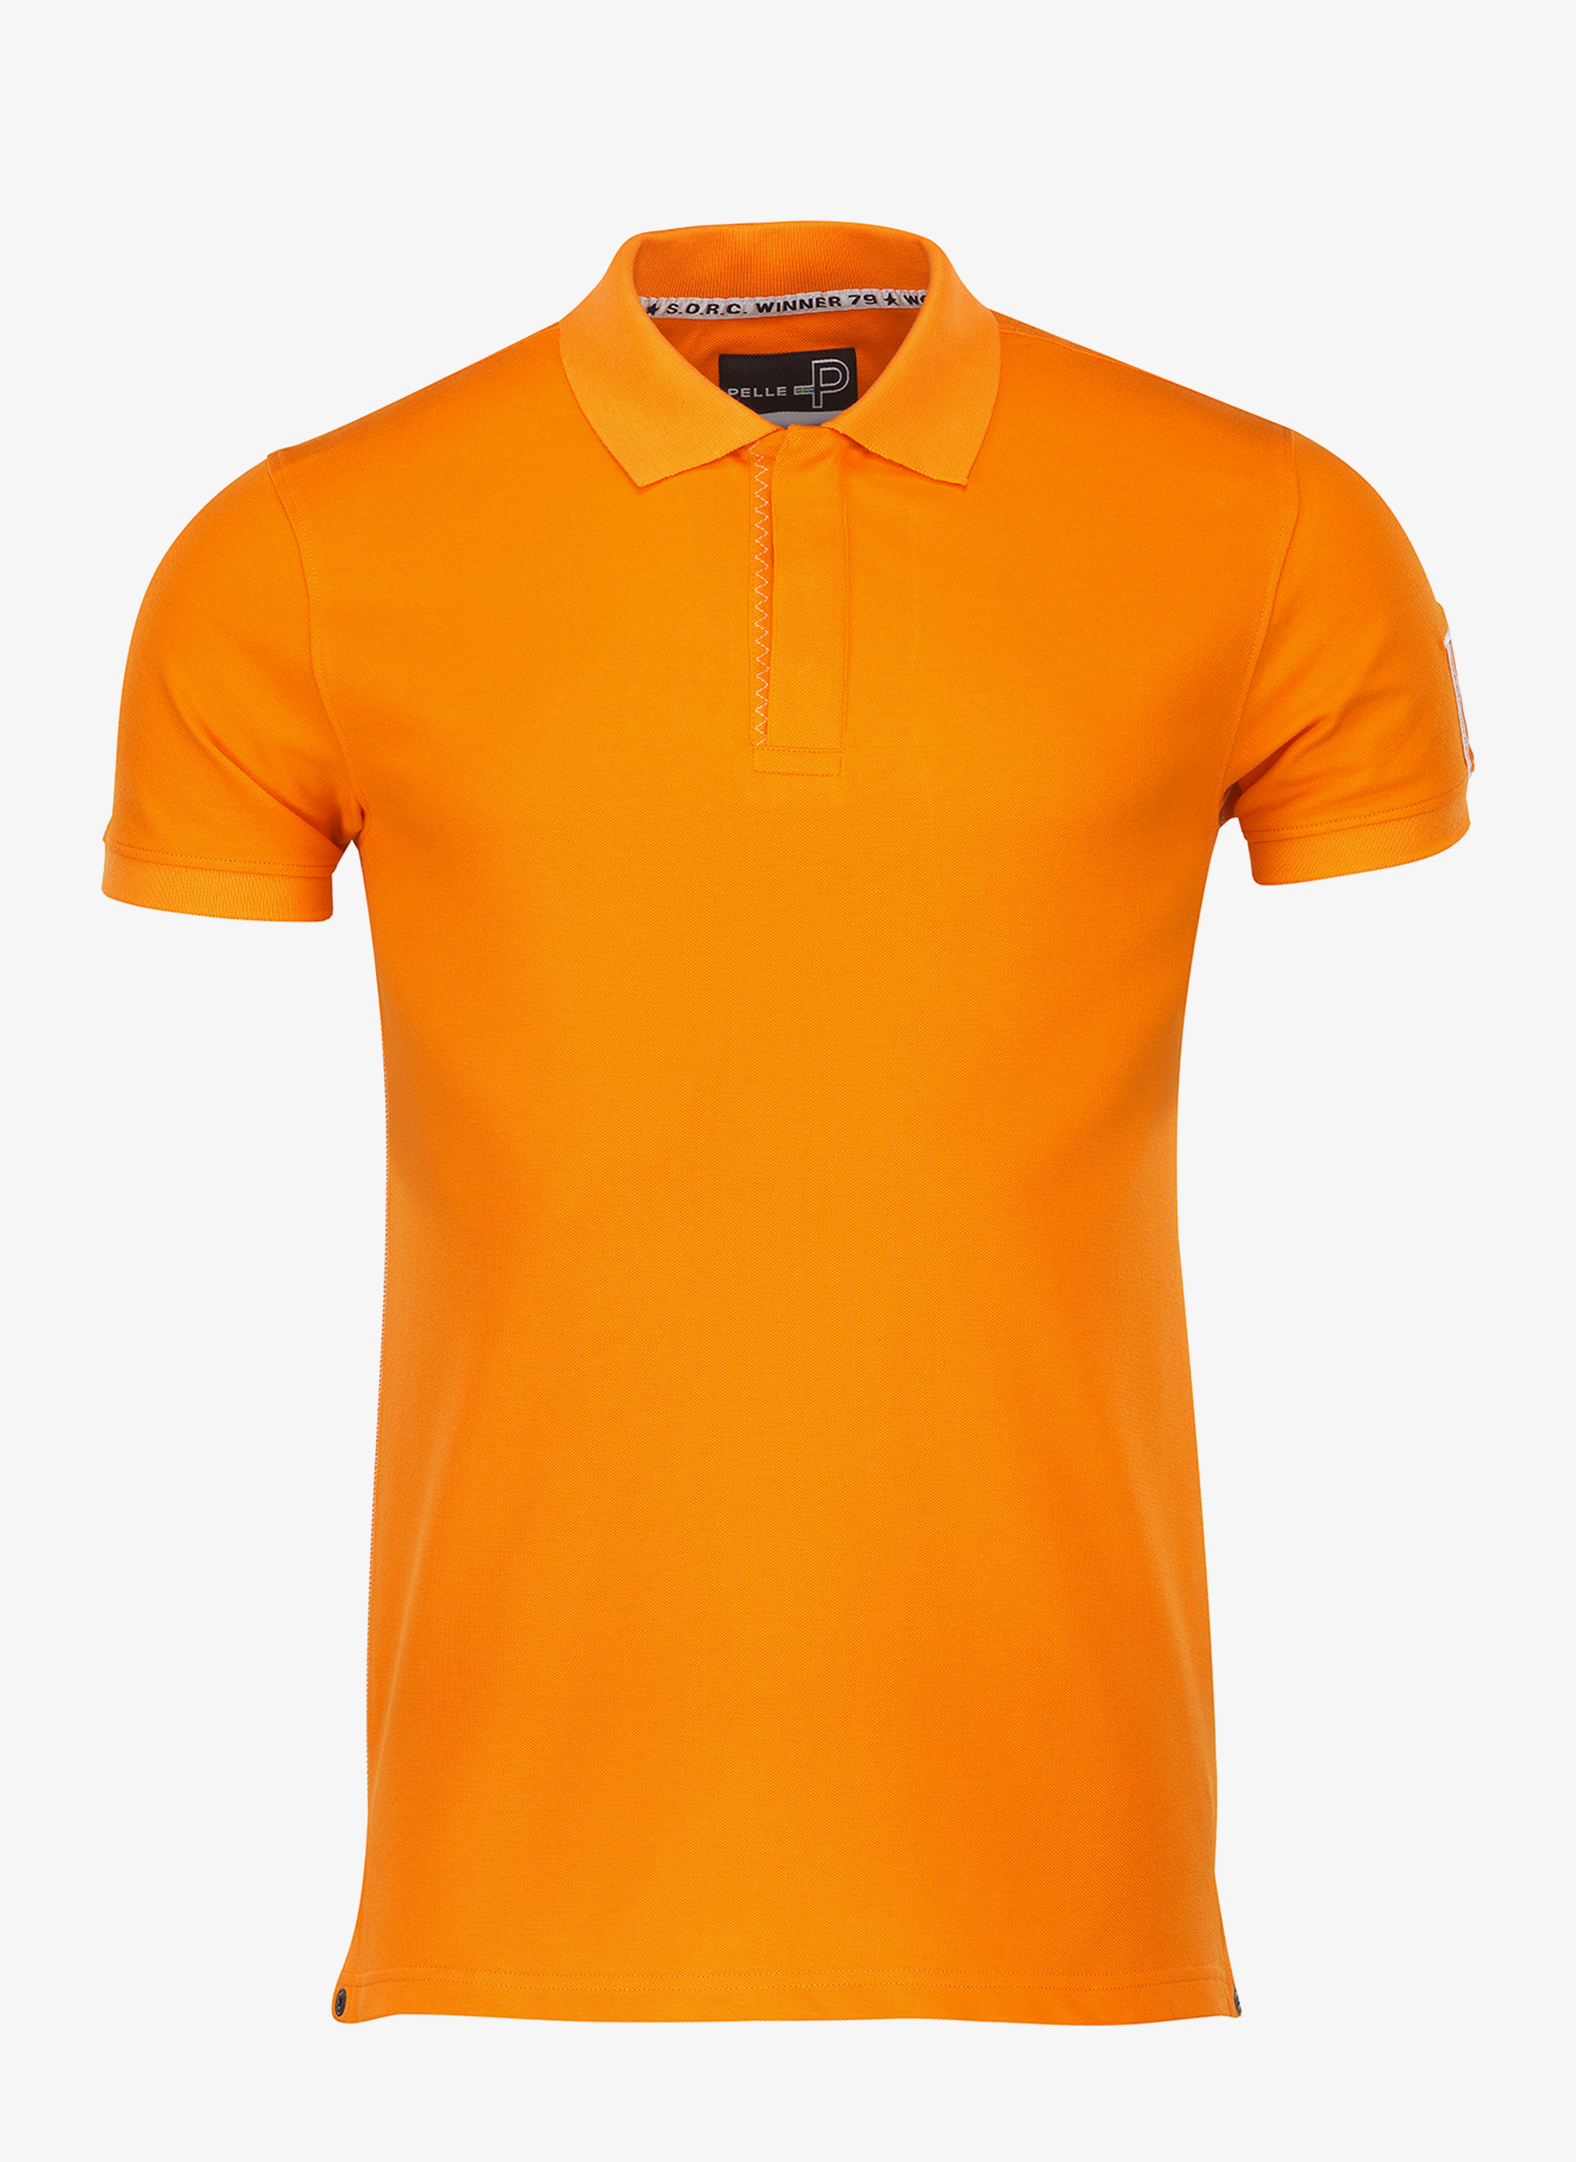 Team Polo Shirt - Poppy - Ruffords Country Store